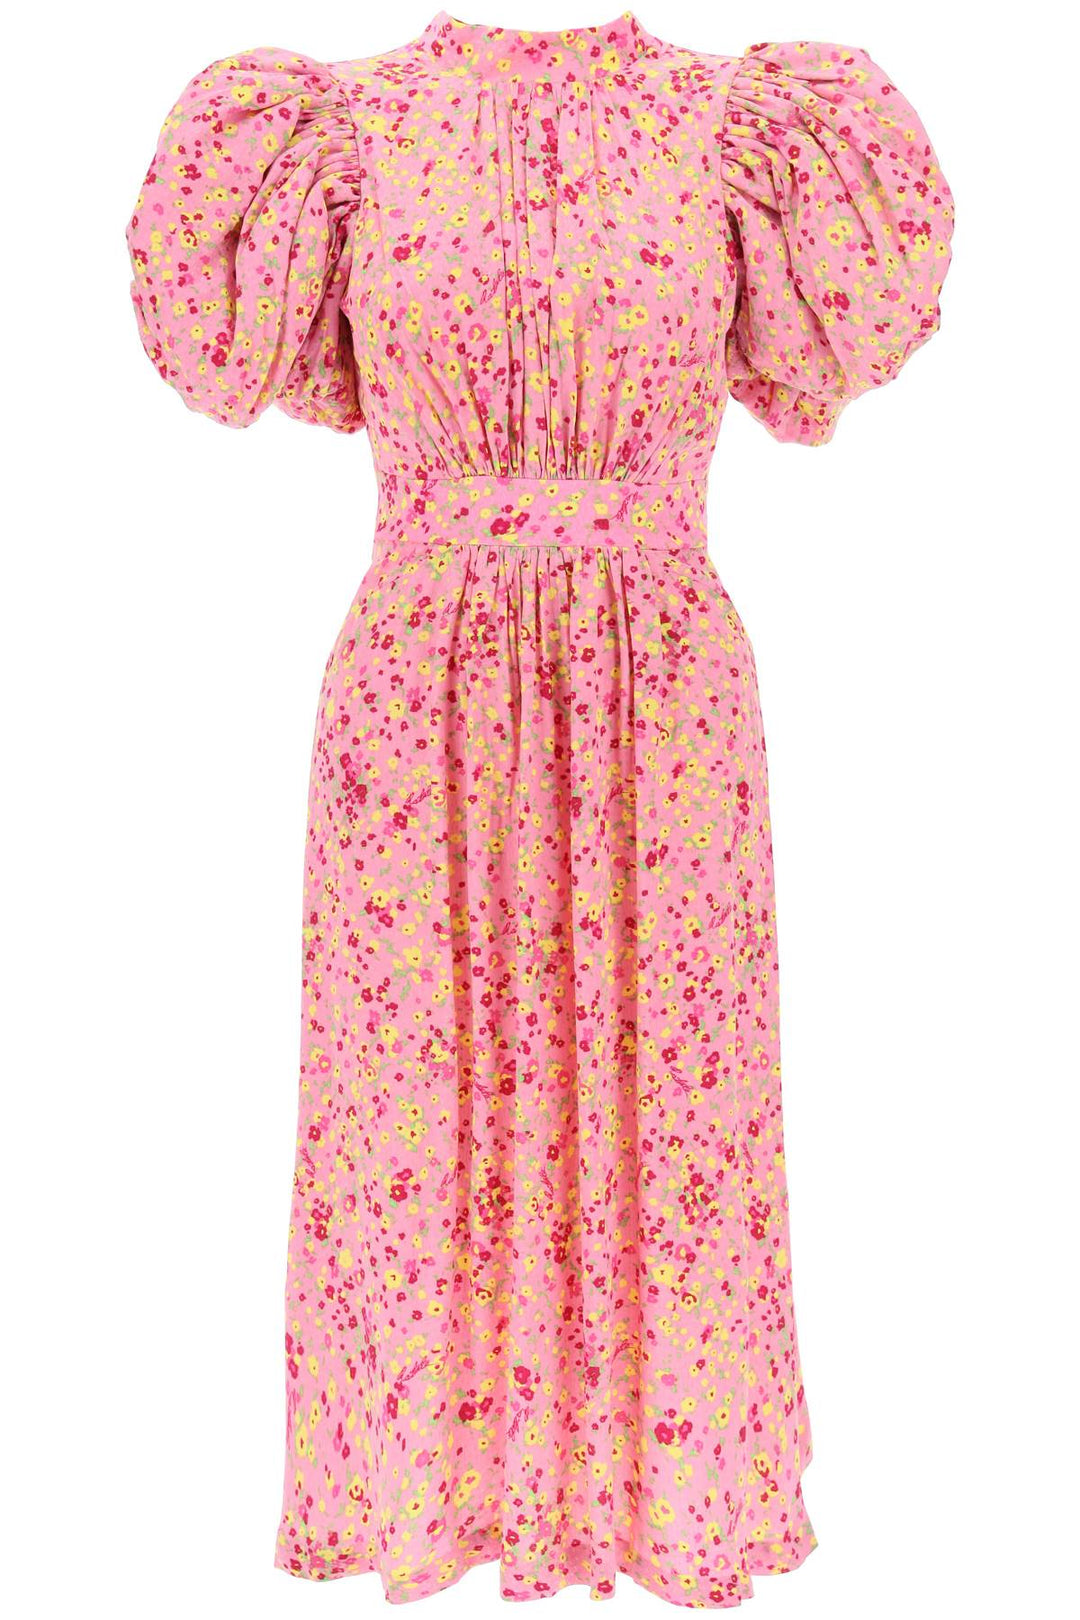 Rotate Jacquard Dress With Puffy Sleeves   Rosa